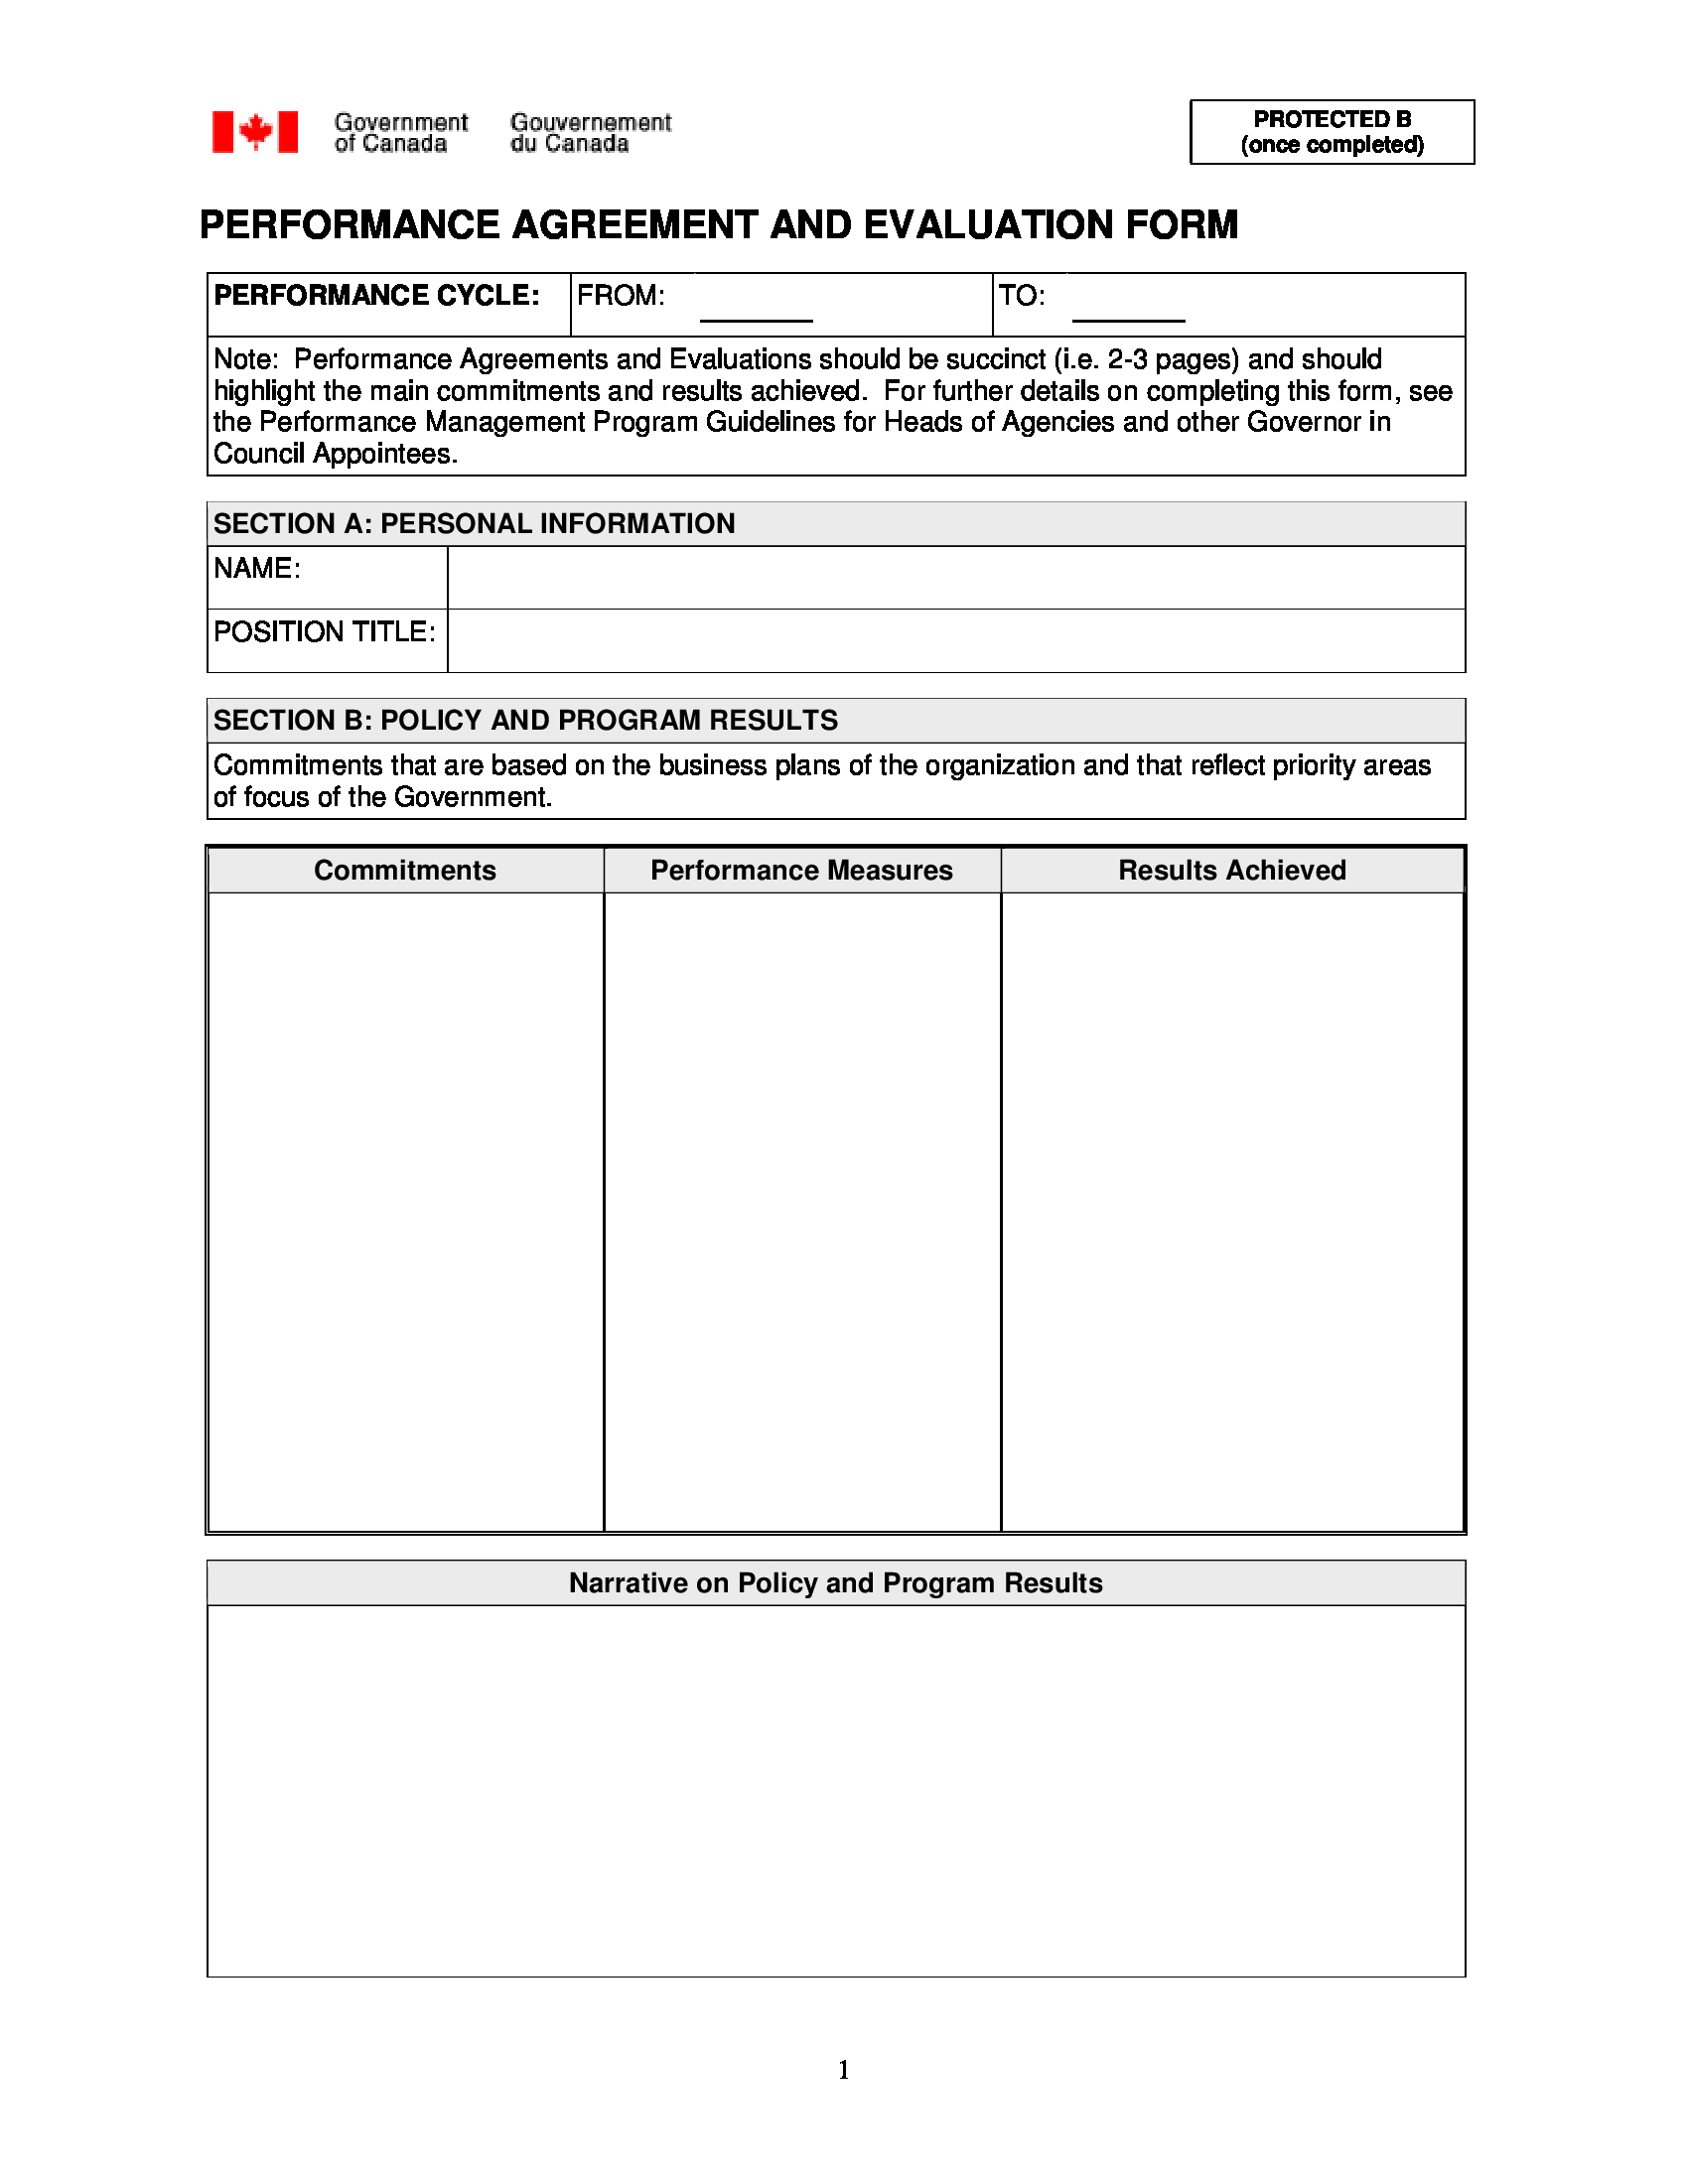 performance agreement and evaluation form 1